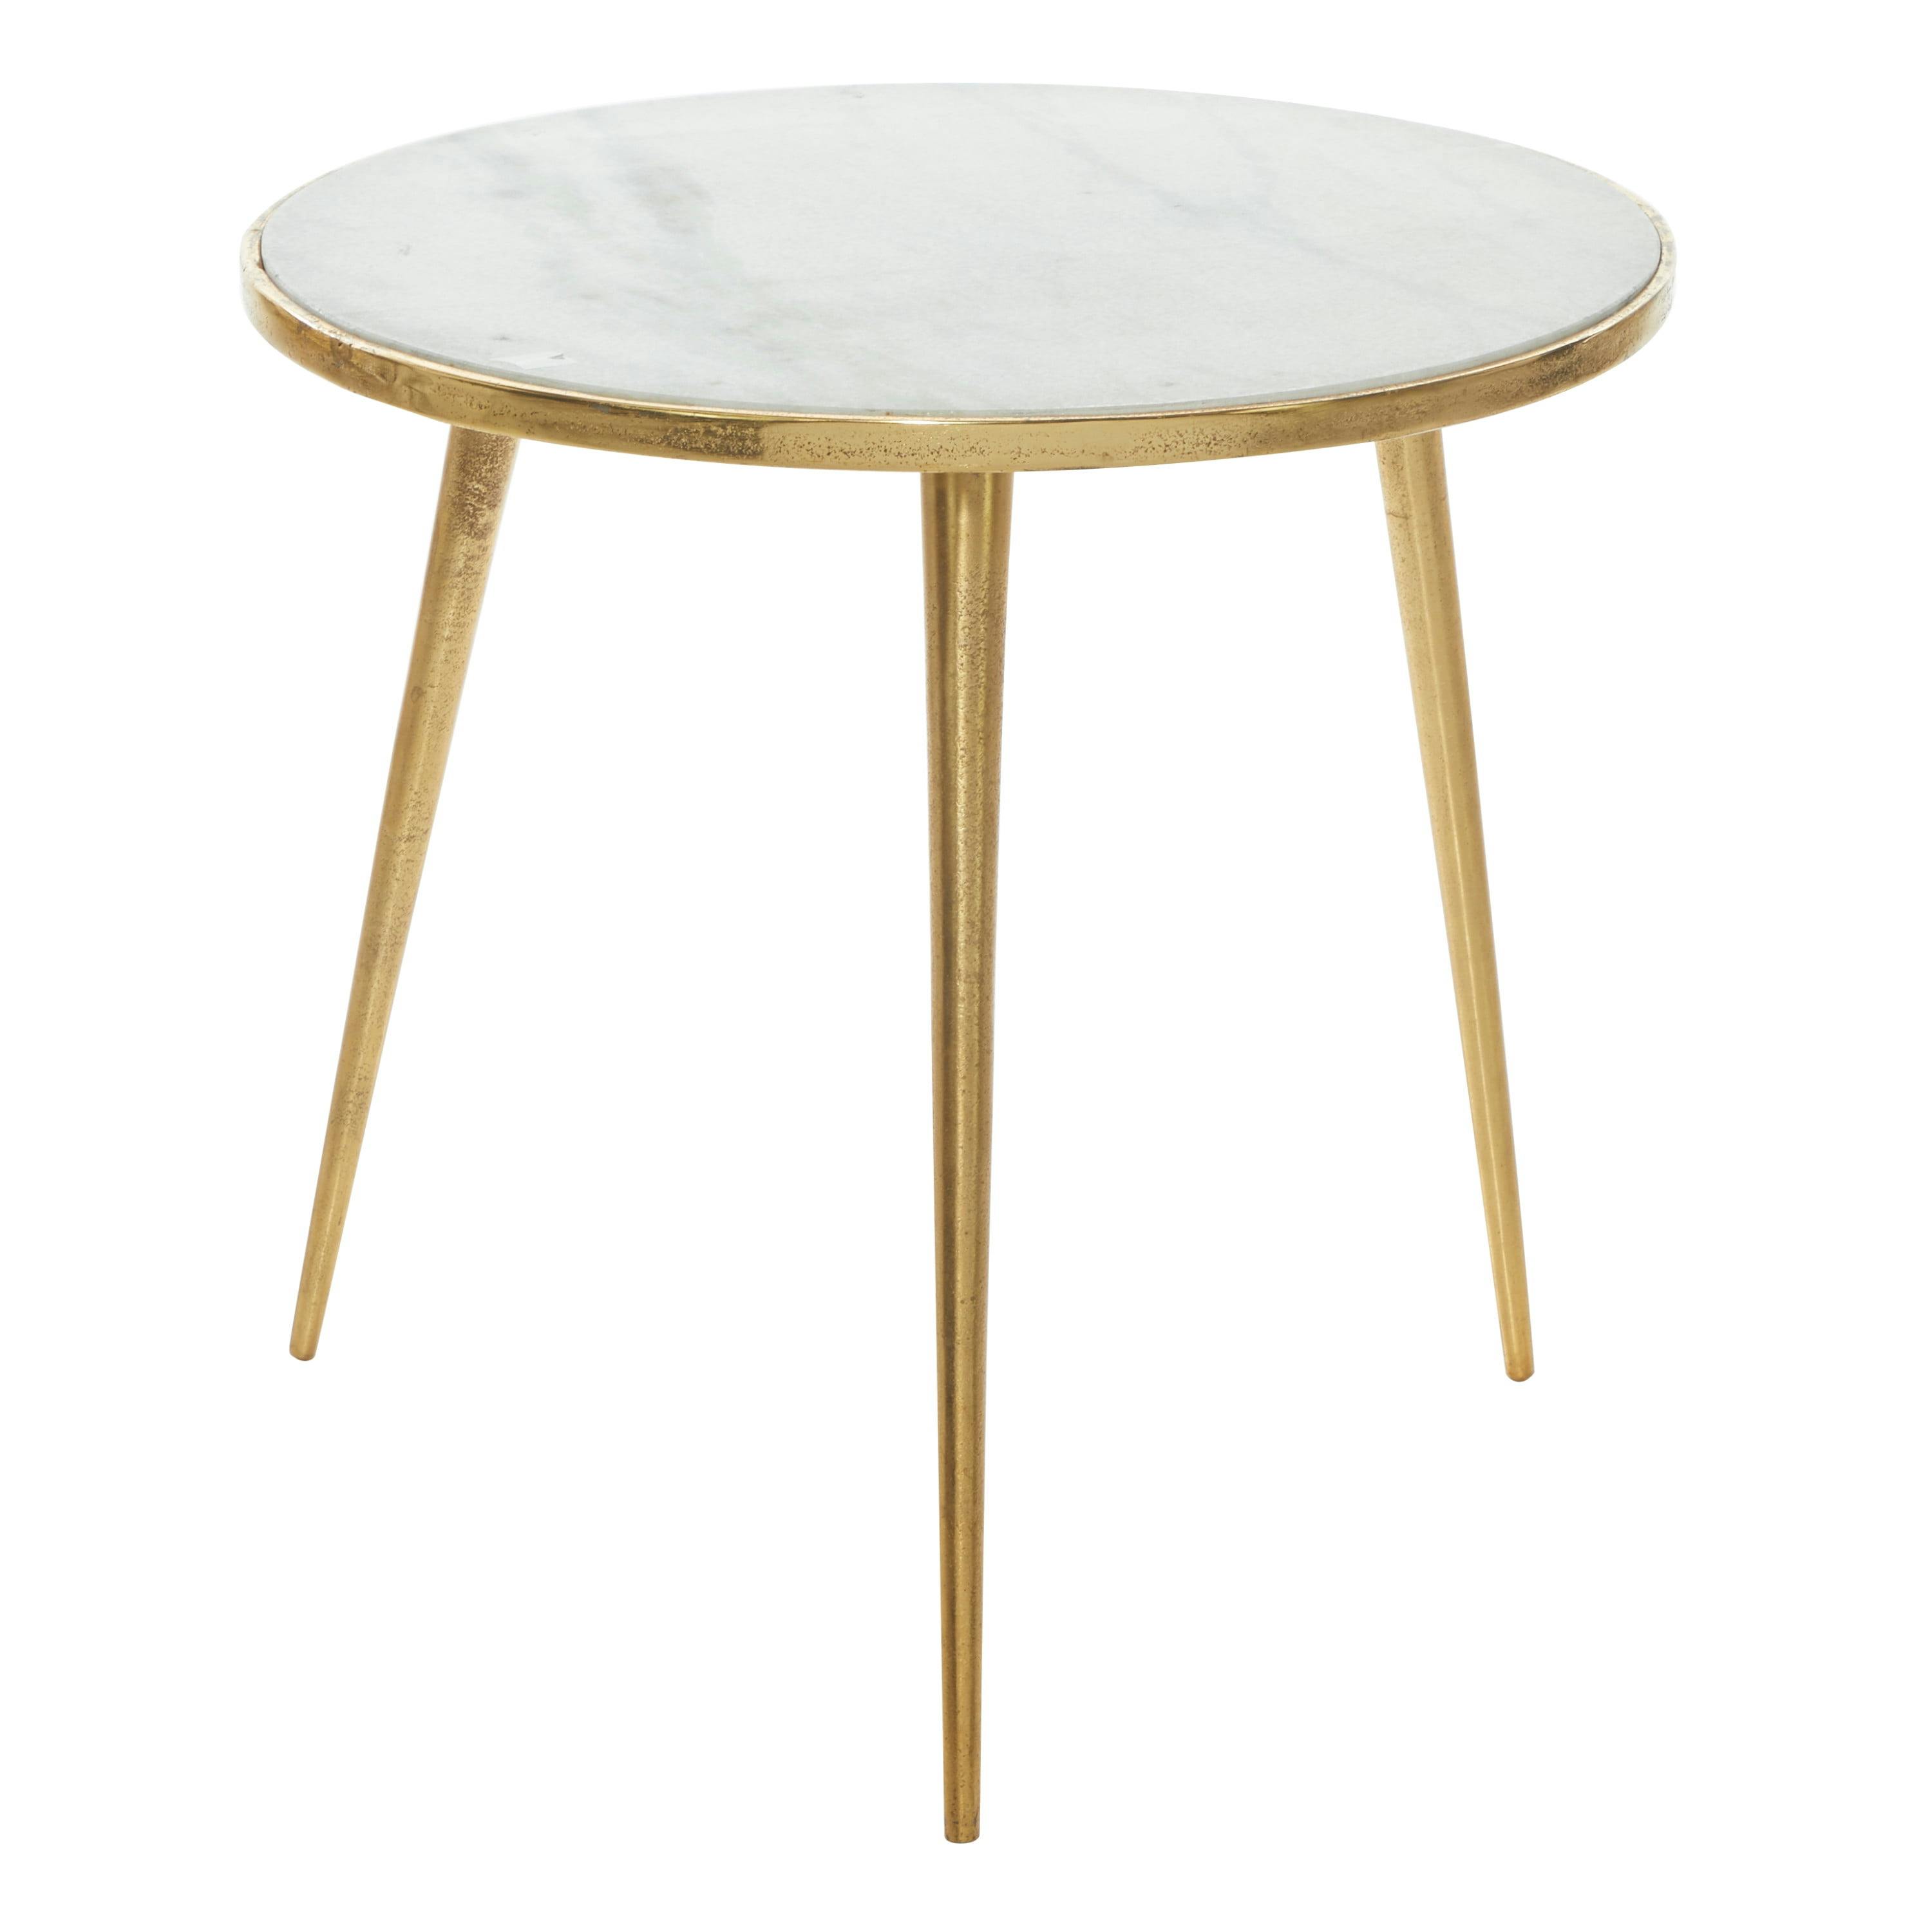 Elegant Gold & Marble Round Accent Table - 21" x 20"